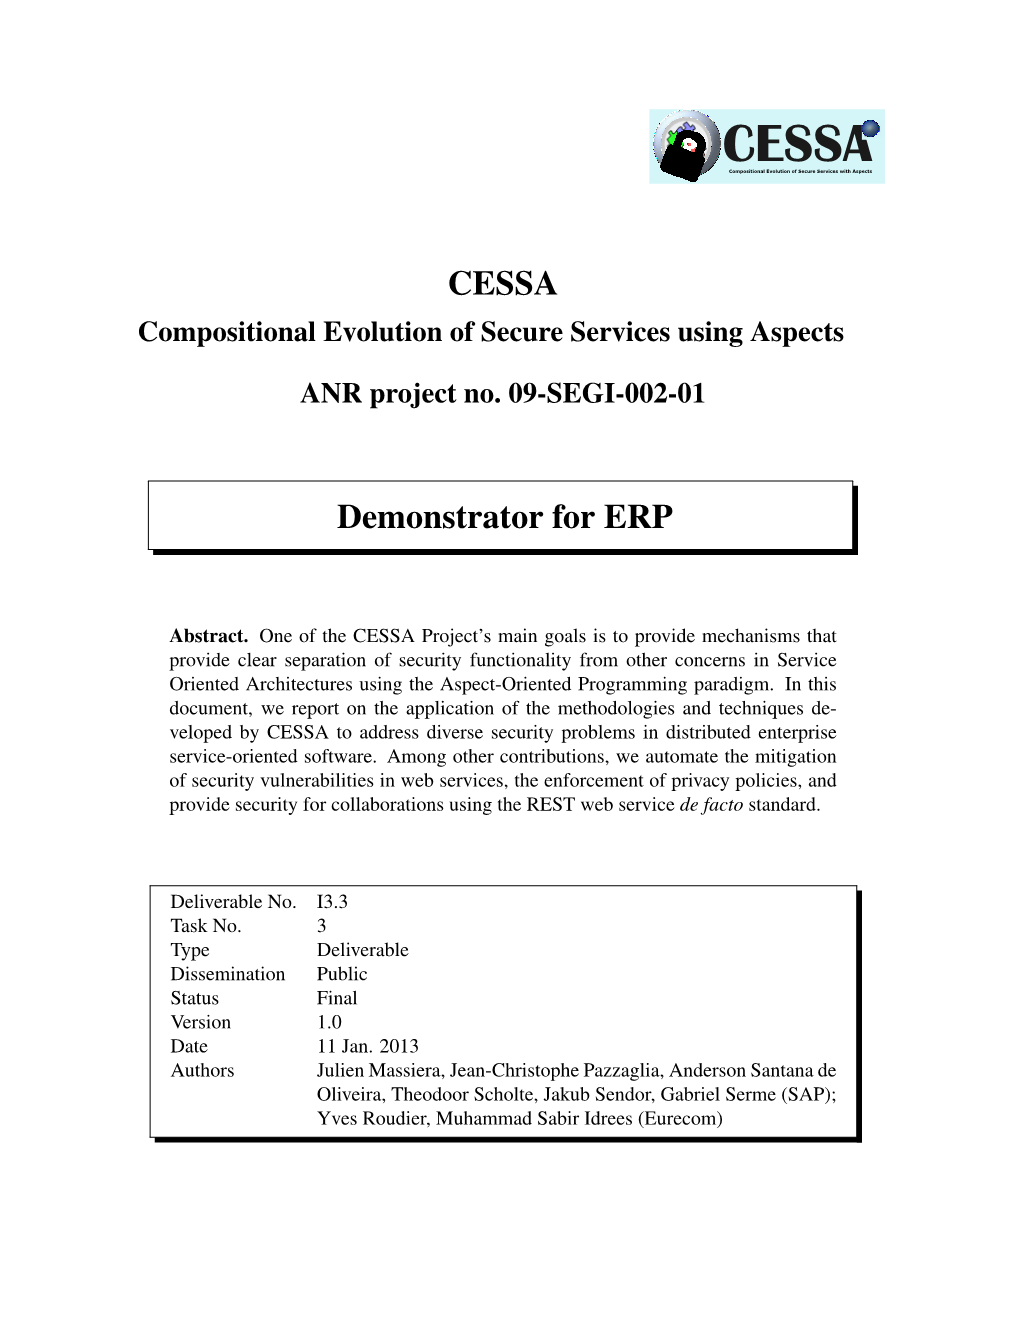 Compositional Evolution of Secure Services Using Aspects ANR Project